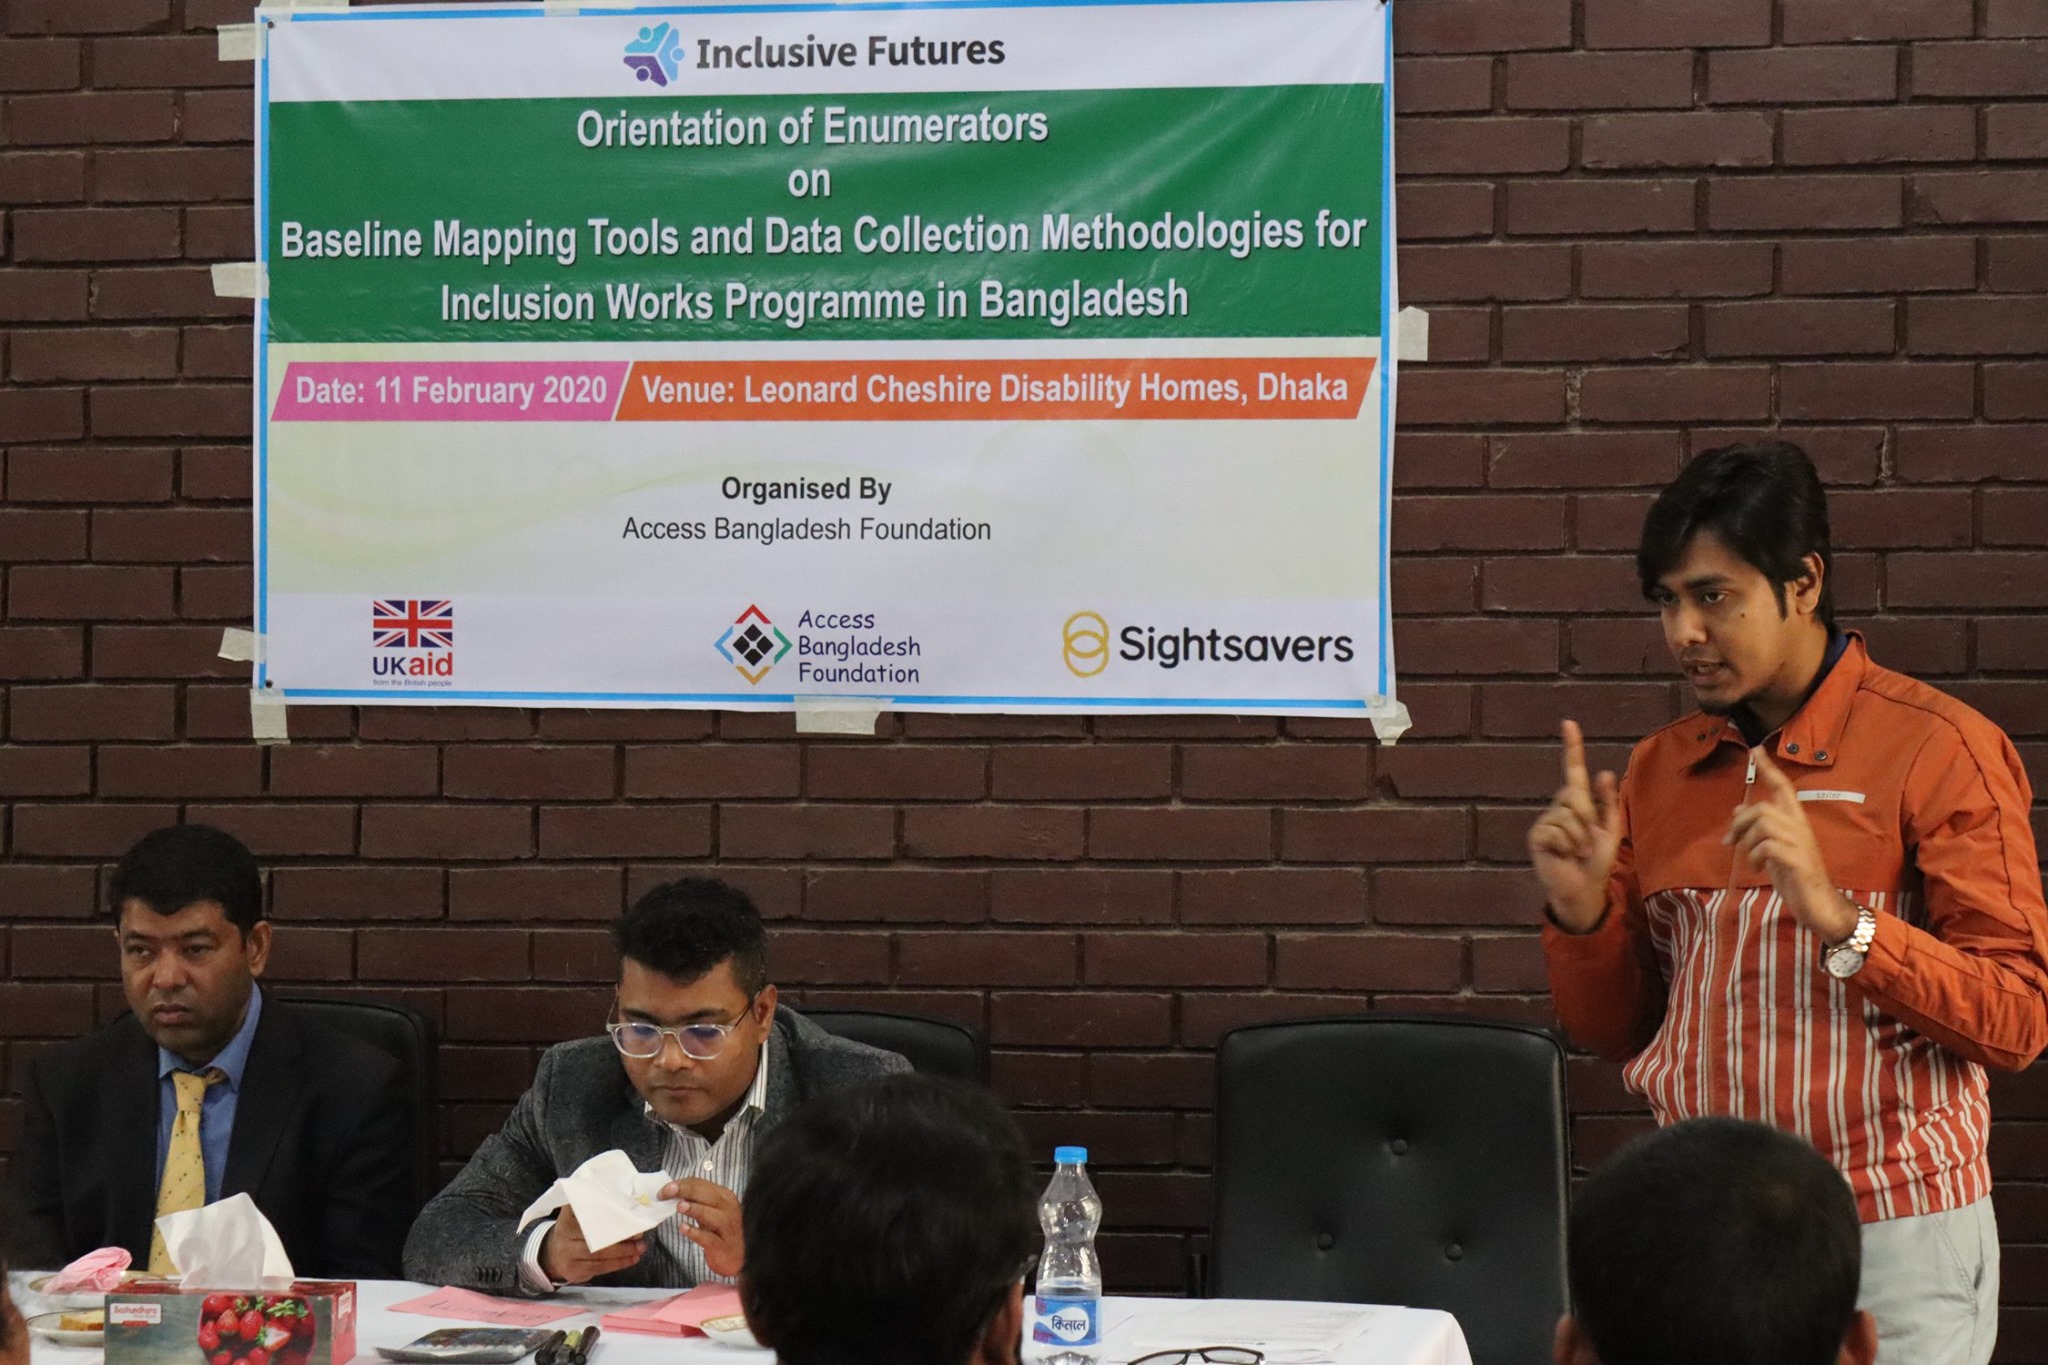 Baseline Mapping Tools and Data Collection Methodologies for Inclusion Works Programme in Bangladesh